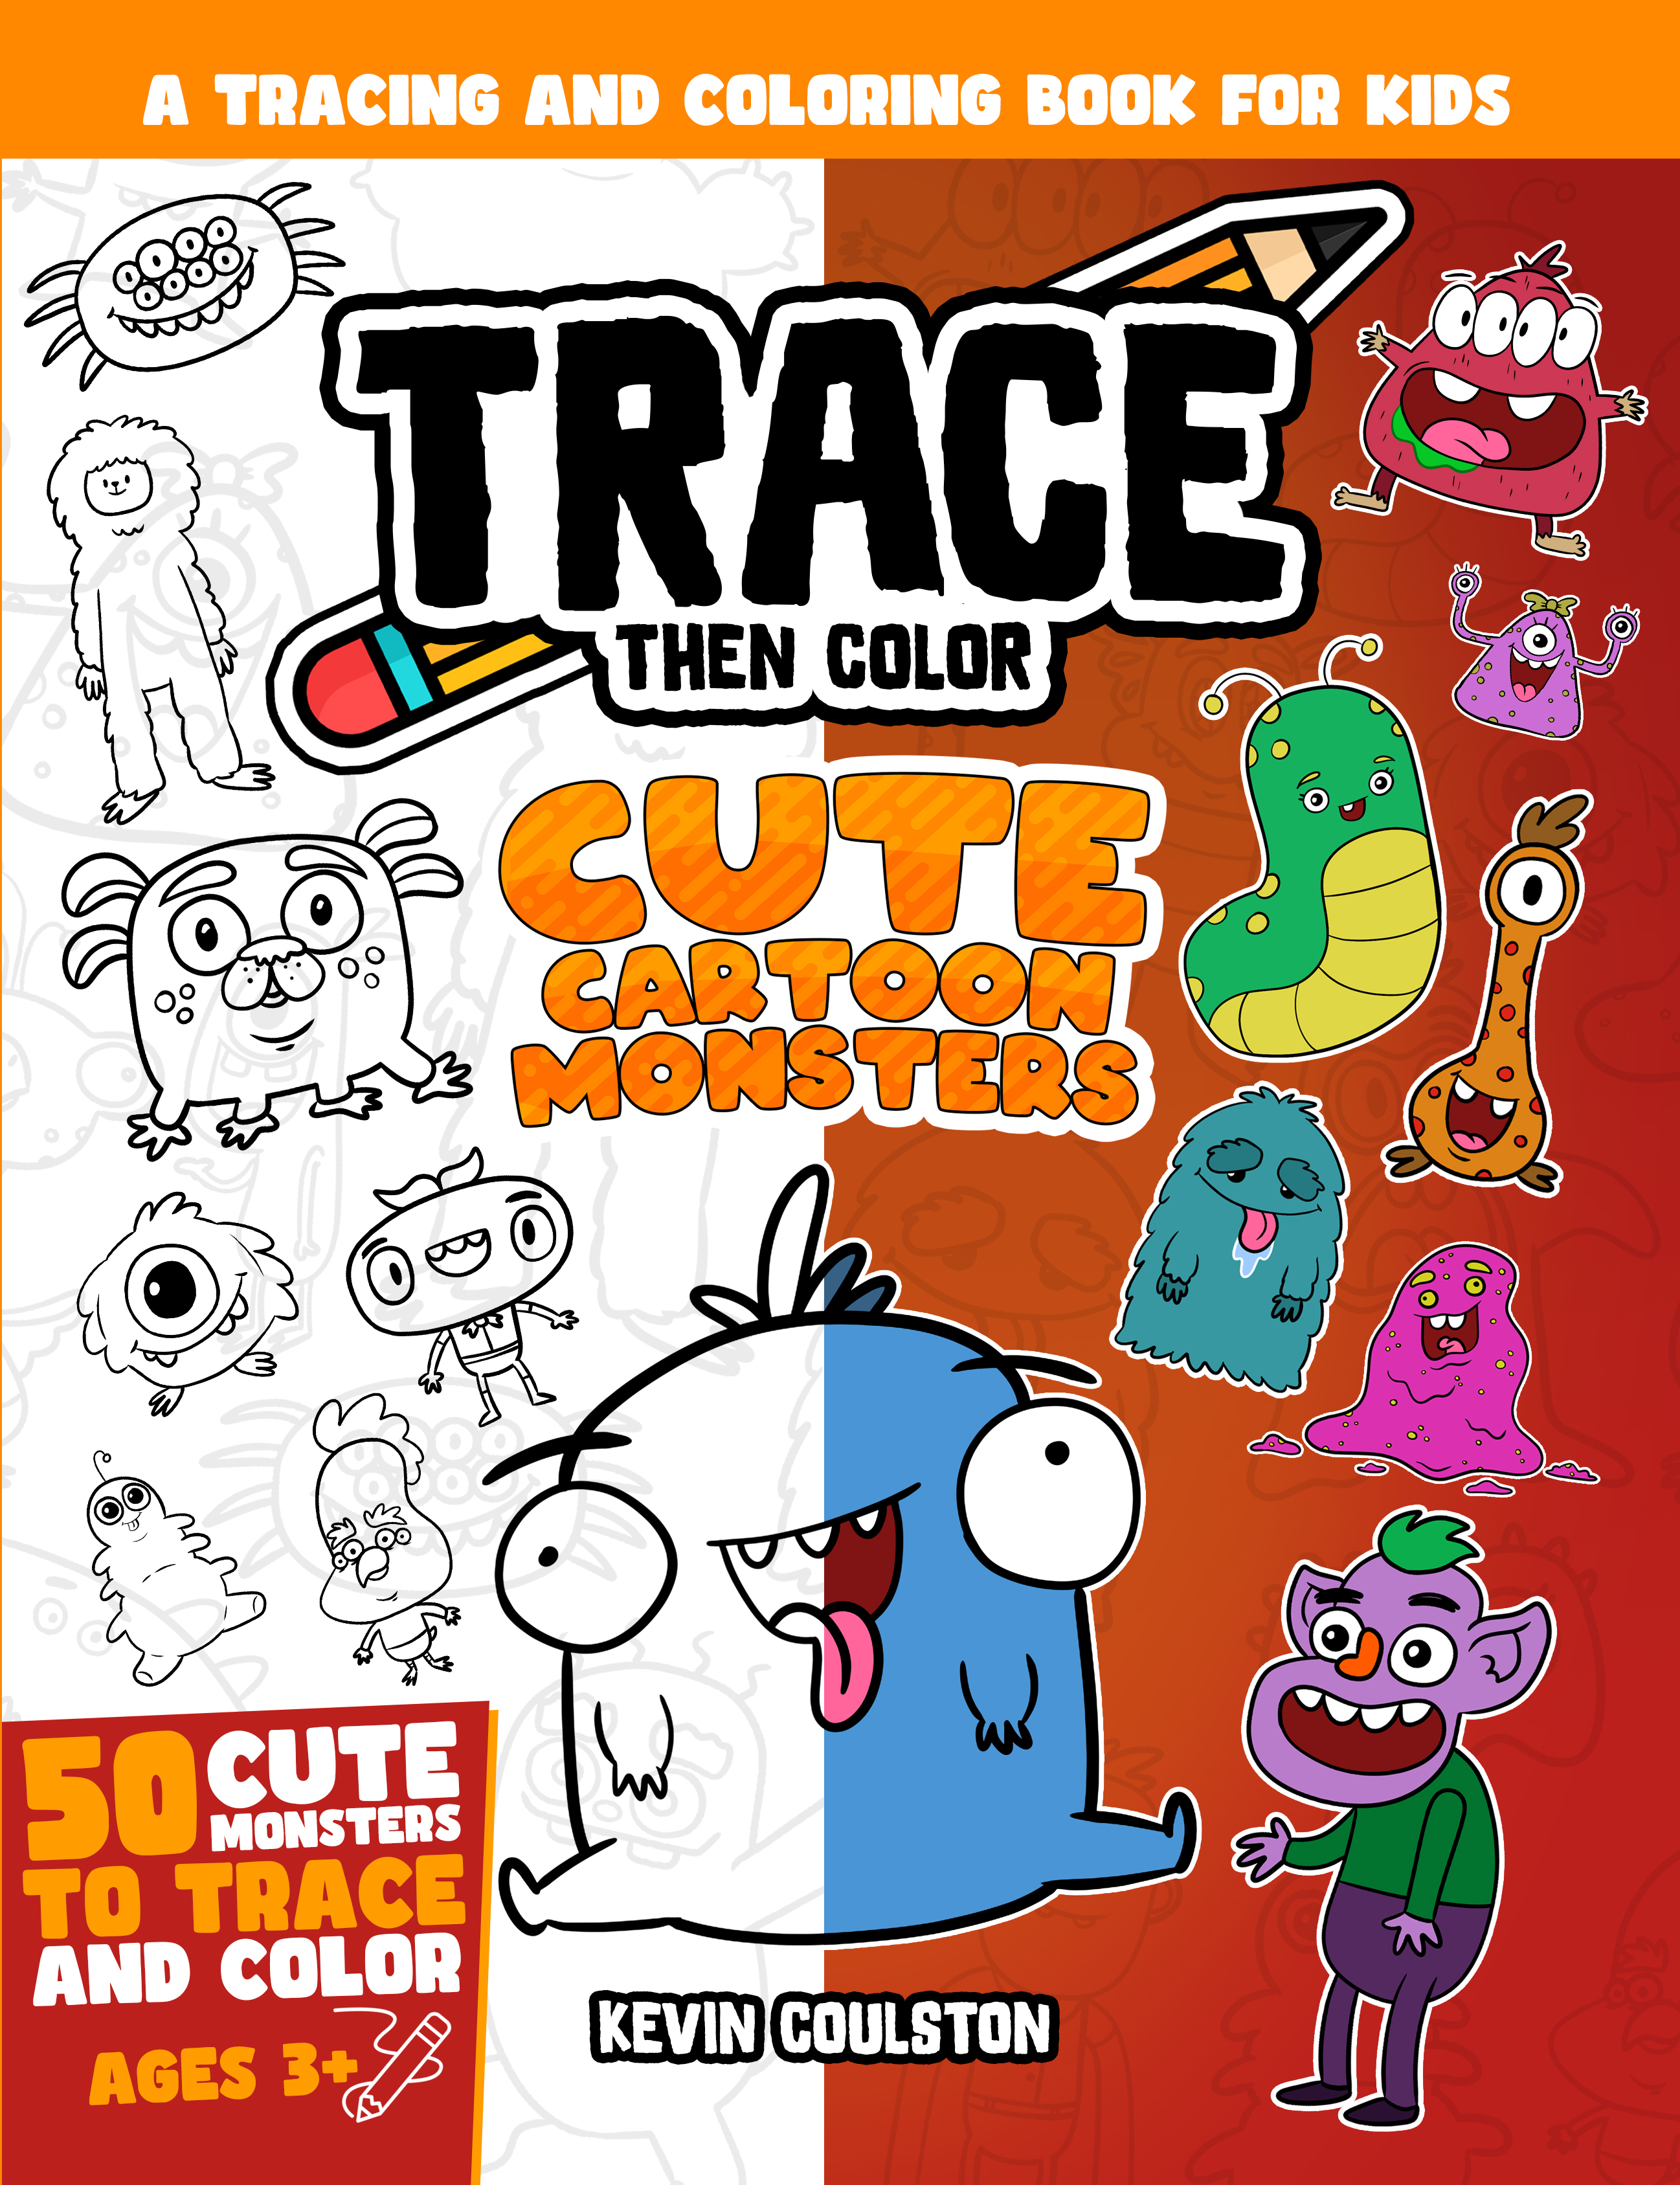 Trace Then Color: Cute Cartoon Monsters by Kevin Coulston Book Cover